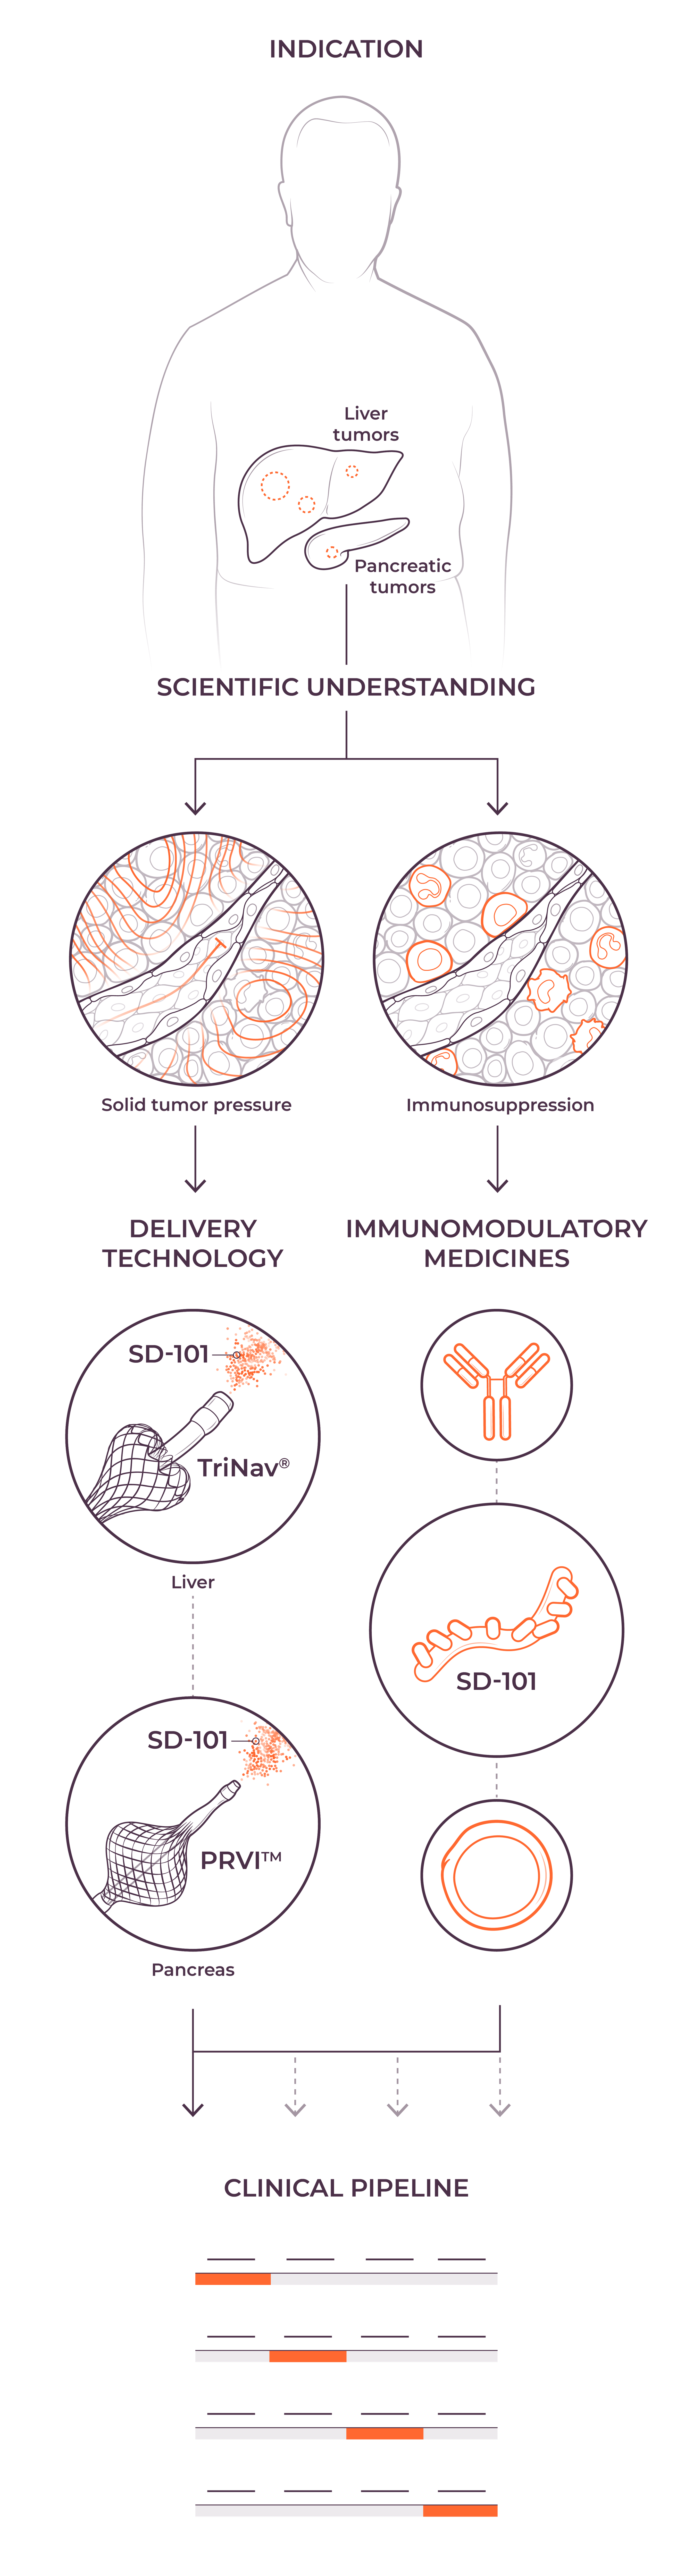 Illustration overview of TriSalus’ platform. The indications TriSalus focuses on are the liver and pancreas, their location is shown in an elderly man. TriSalus’ approach is based on the scientific understanding of the tumor biology, focused on two significant barriers to deliver: immunosuppression and intratumoral pressure. TriSalus’ integrated approach combines immunomodulatory medicines, such as their therapeutic candidate SD-101, and proprietary delivery technology catered to the organ. TriSalus is currently implementing this approach in their clinical pipeline.